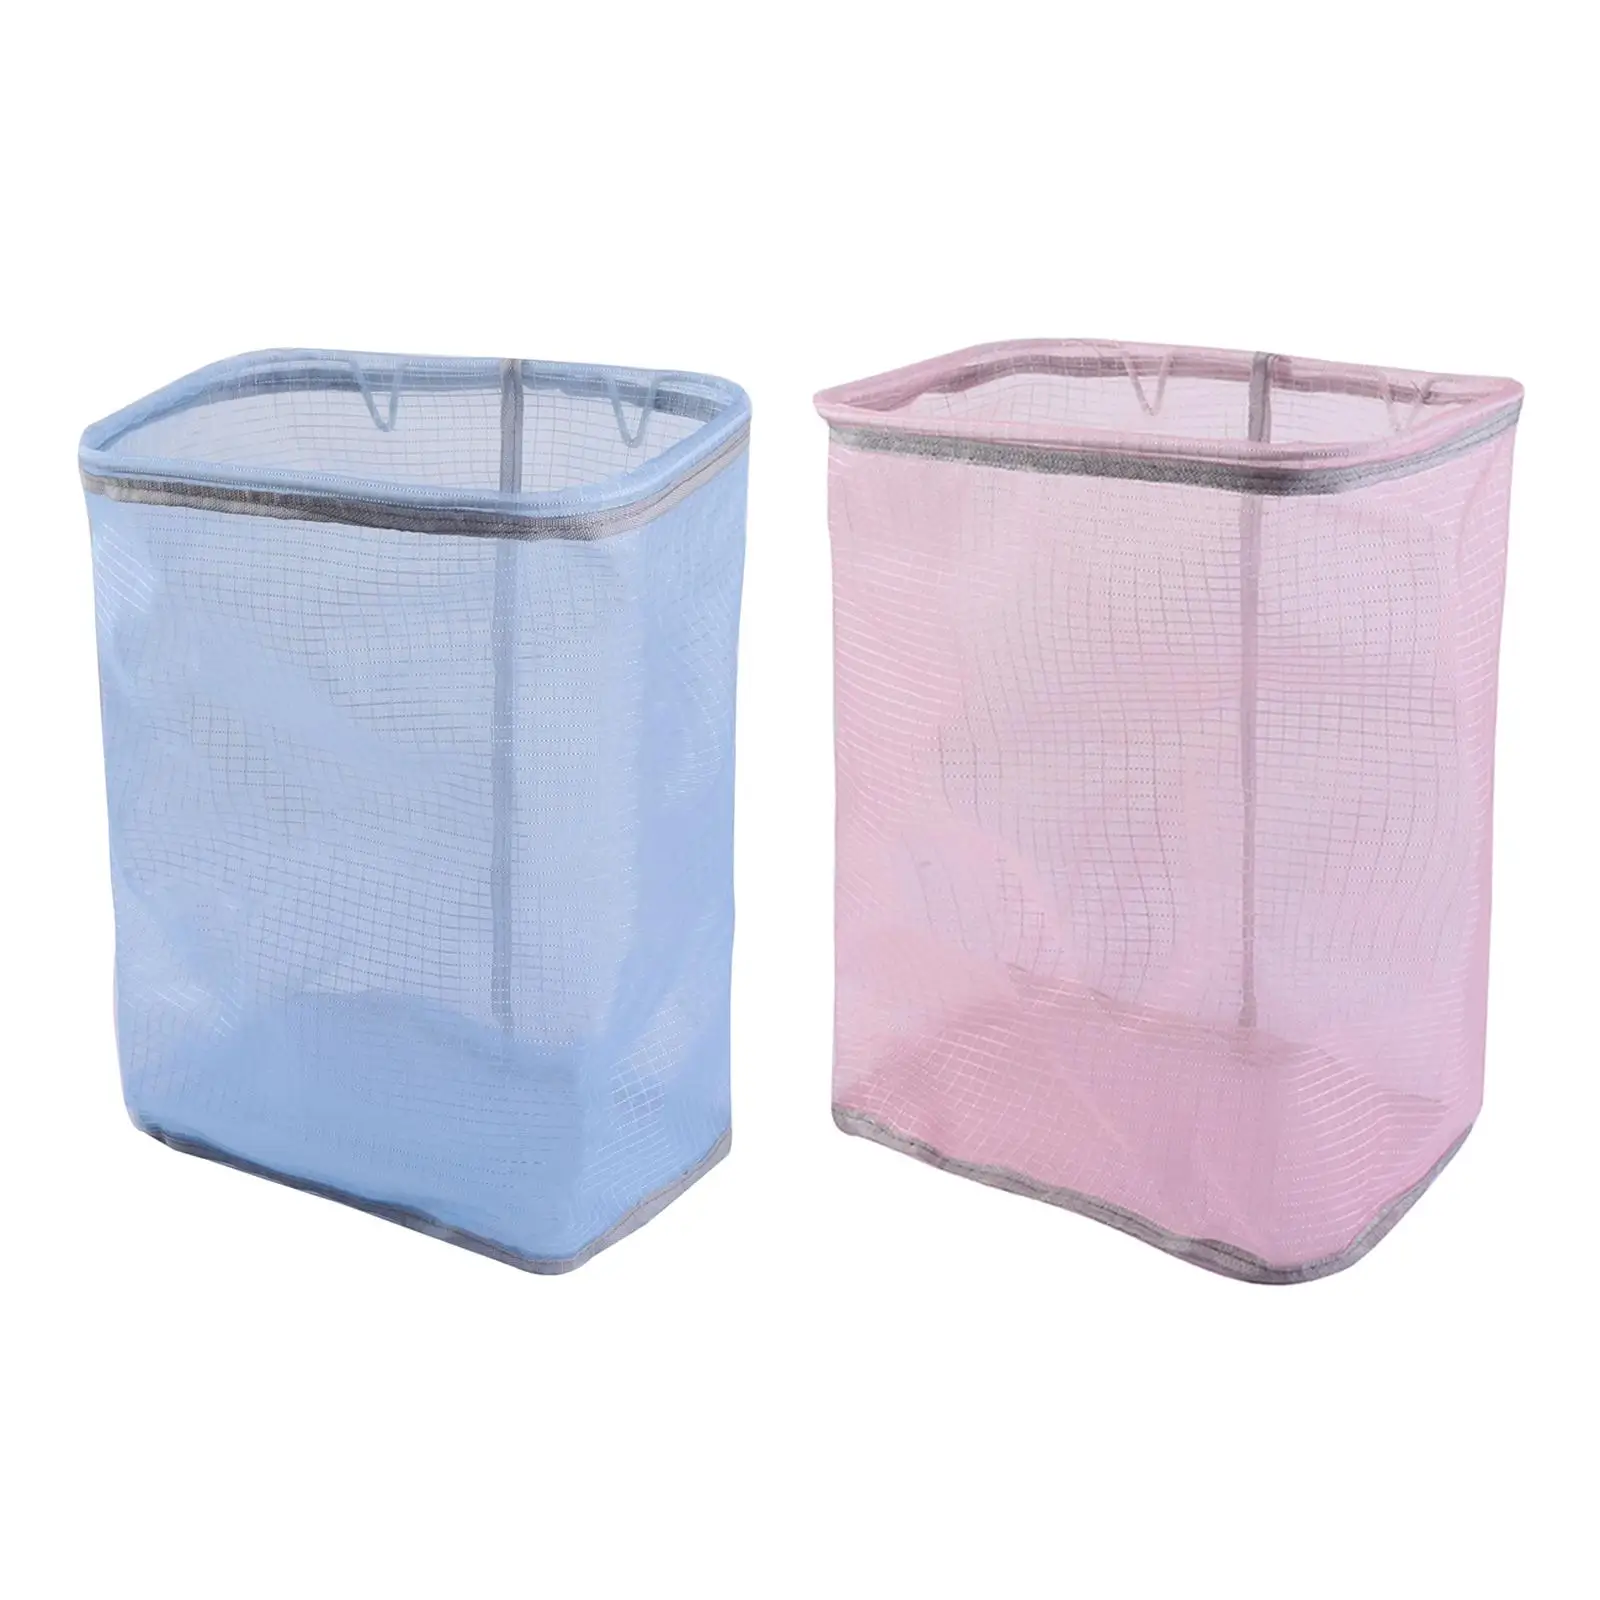 Laundry Hamper Wall Hanging Dirty Clothes Storage Large Sized for Dormitory